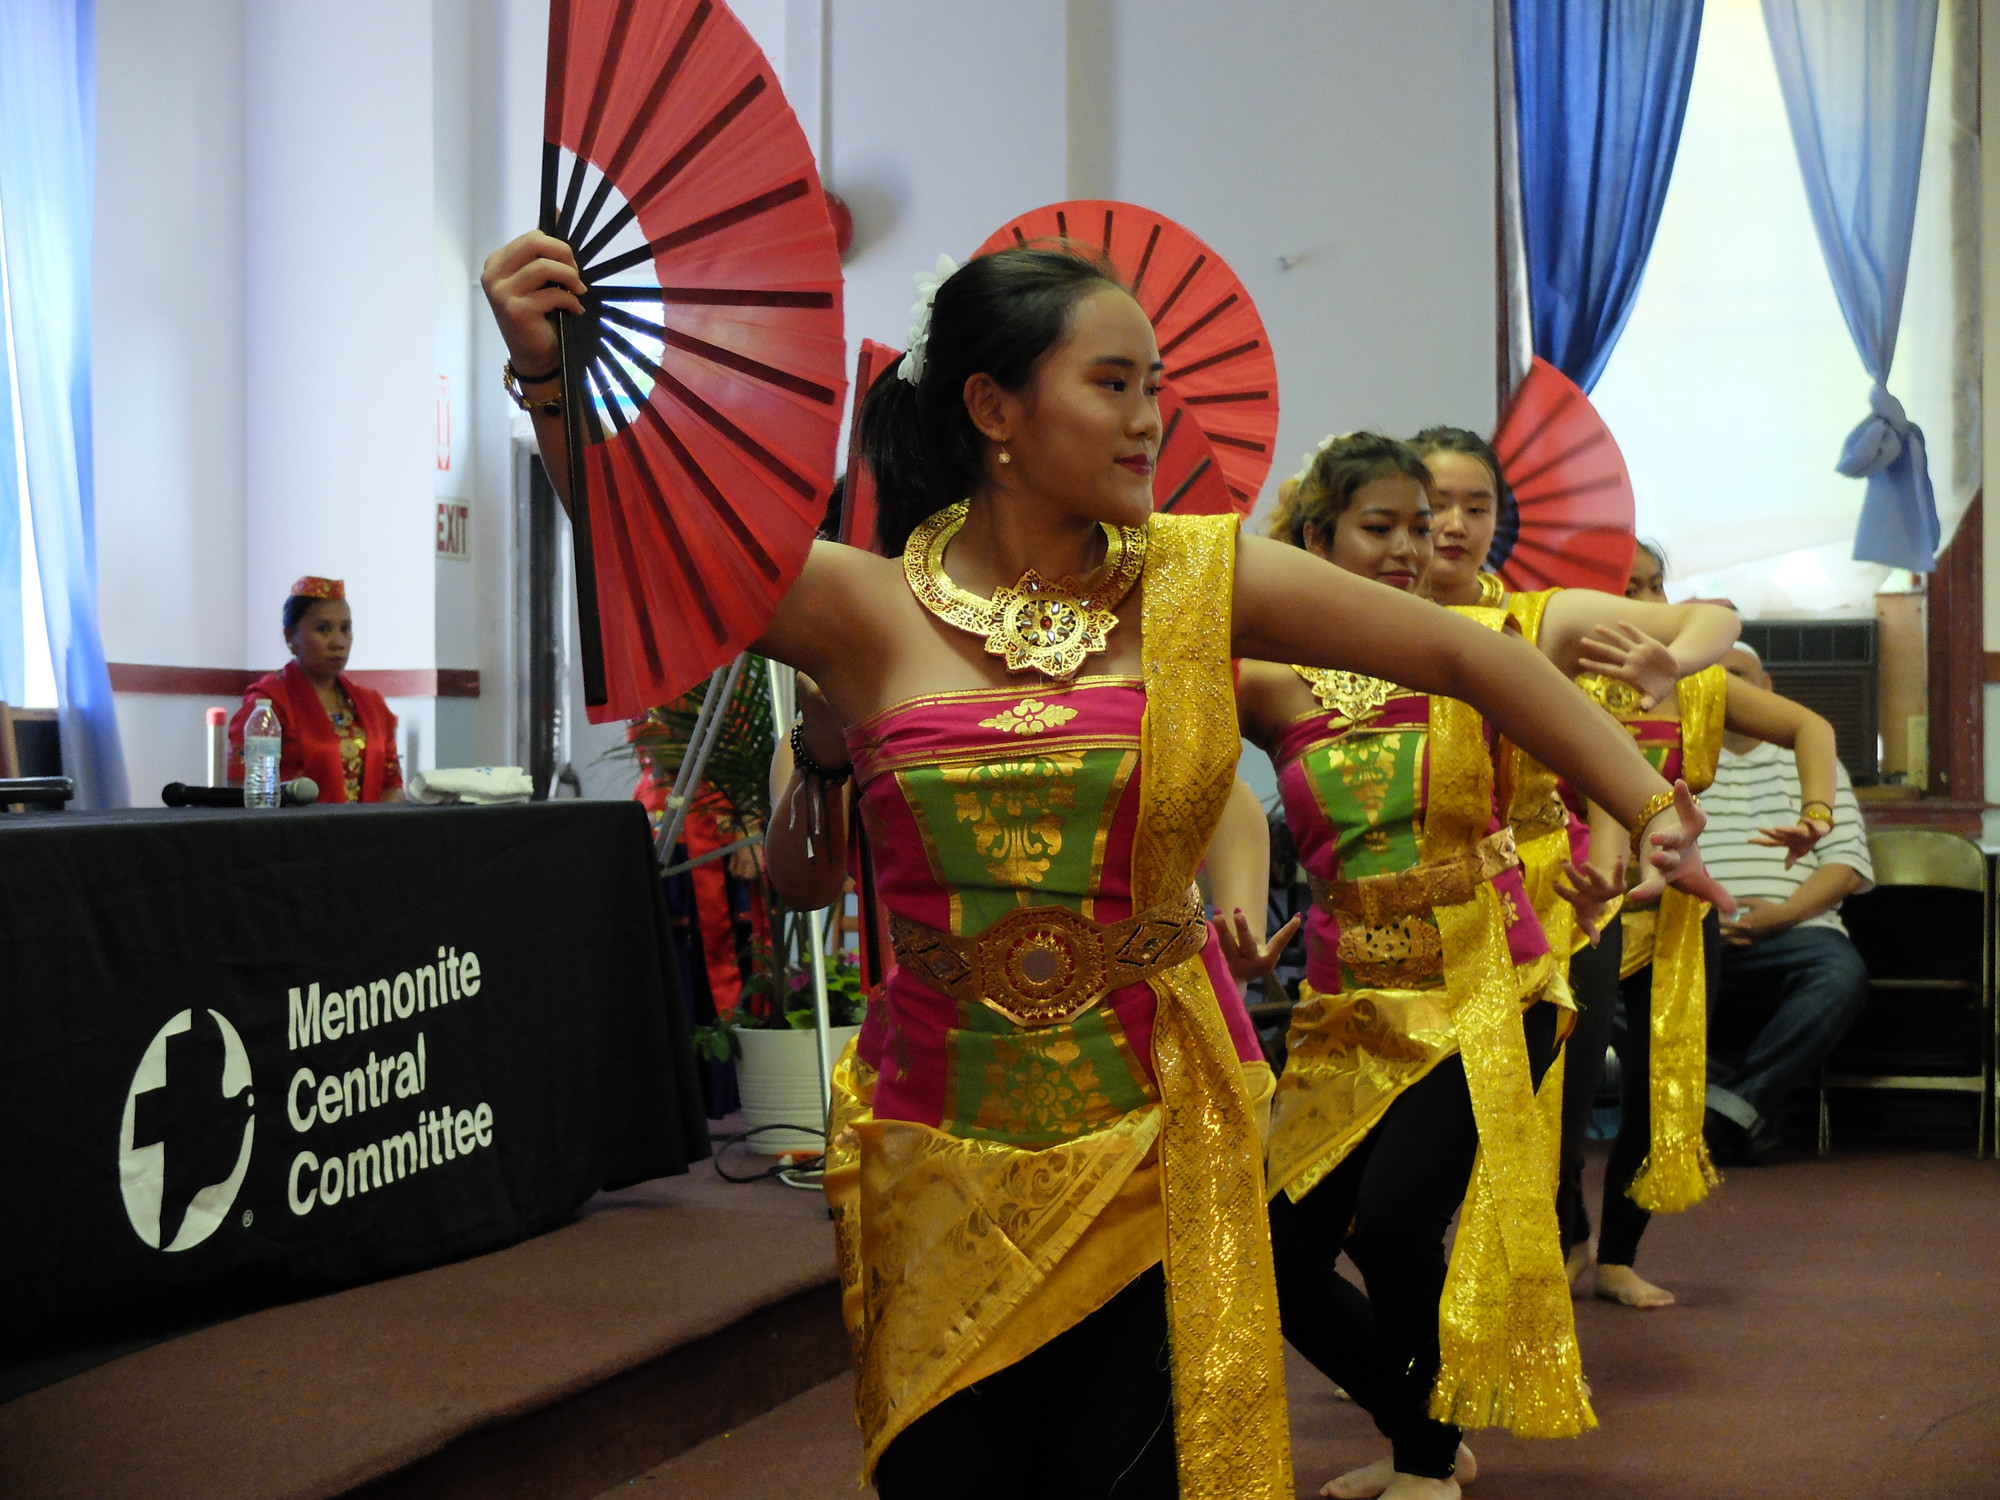 Indonesian dancers at an event